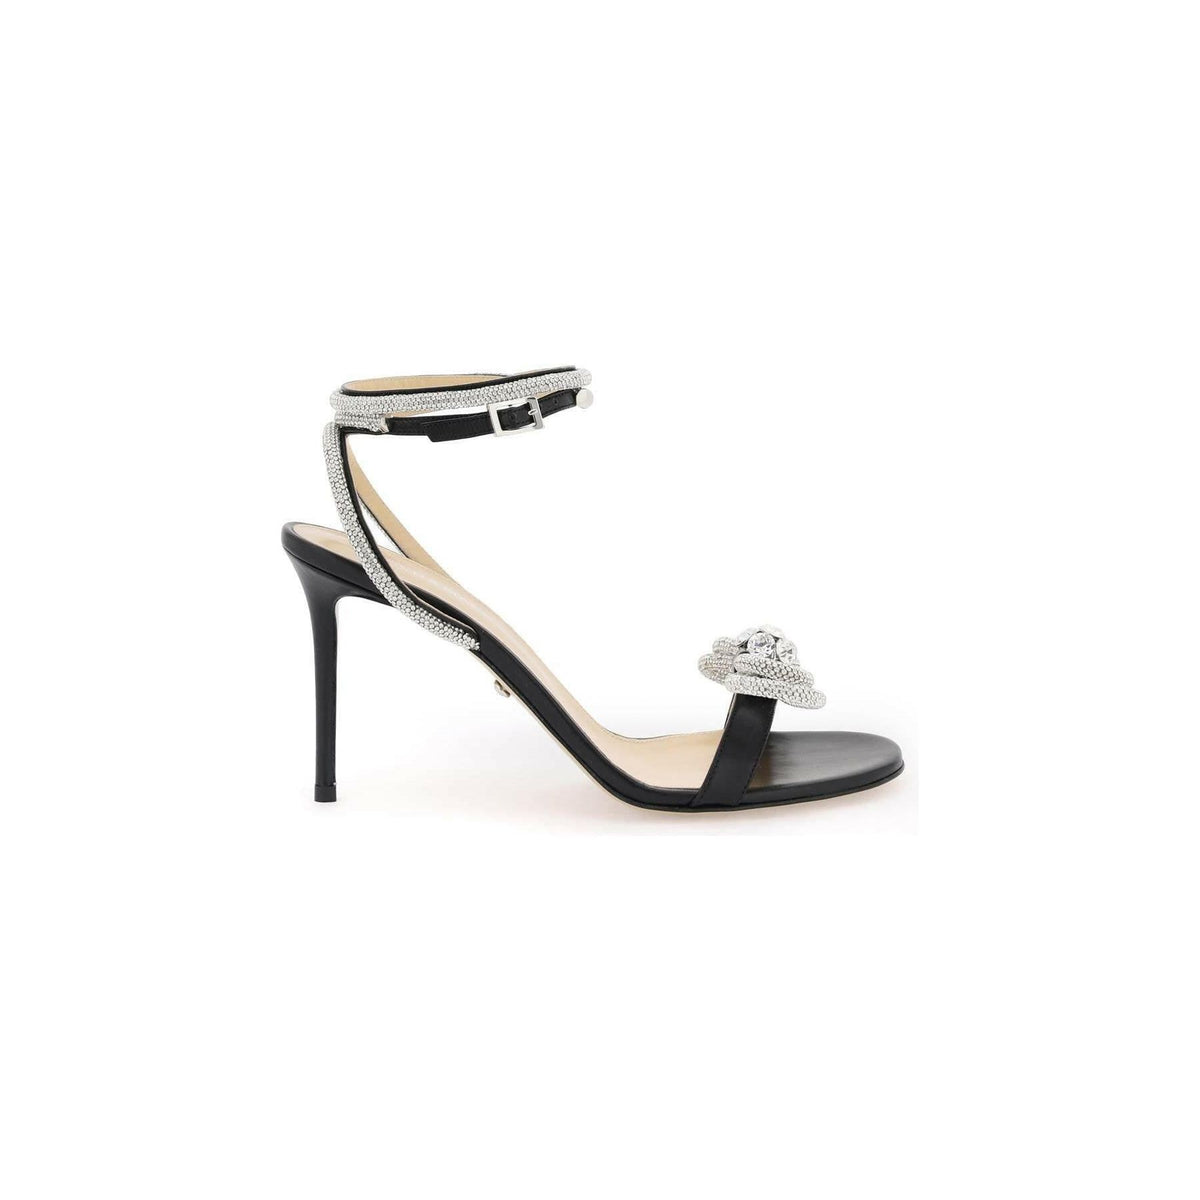 MACH & MACH - Black Double Bow Crystal Embellished Leather Sandals - JOHN JULIA